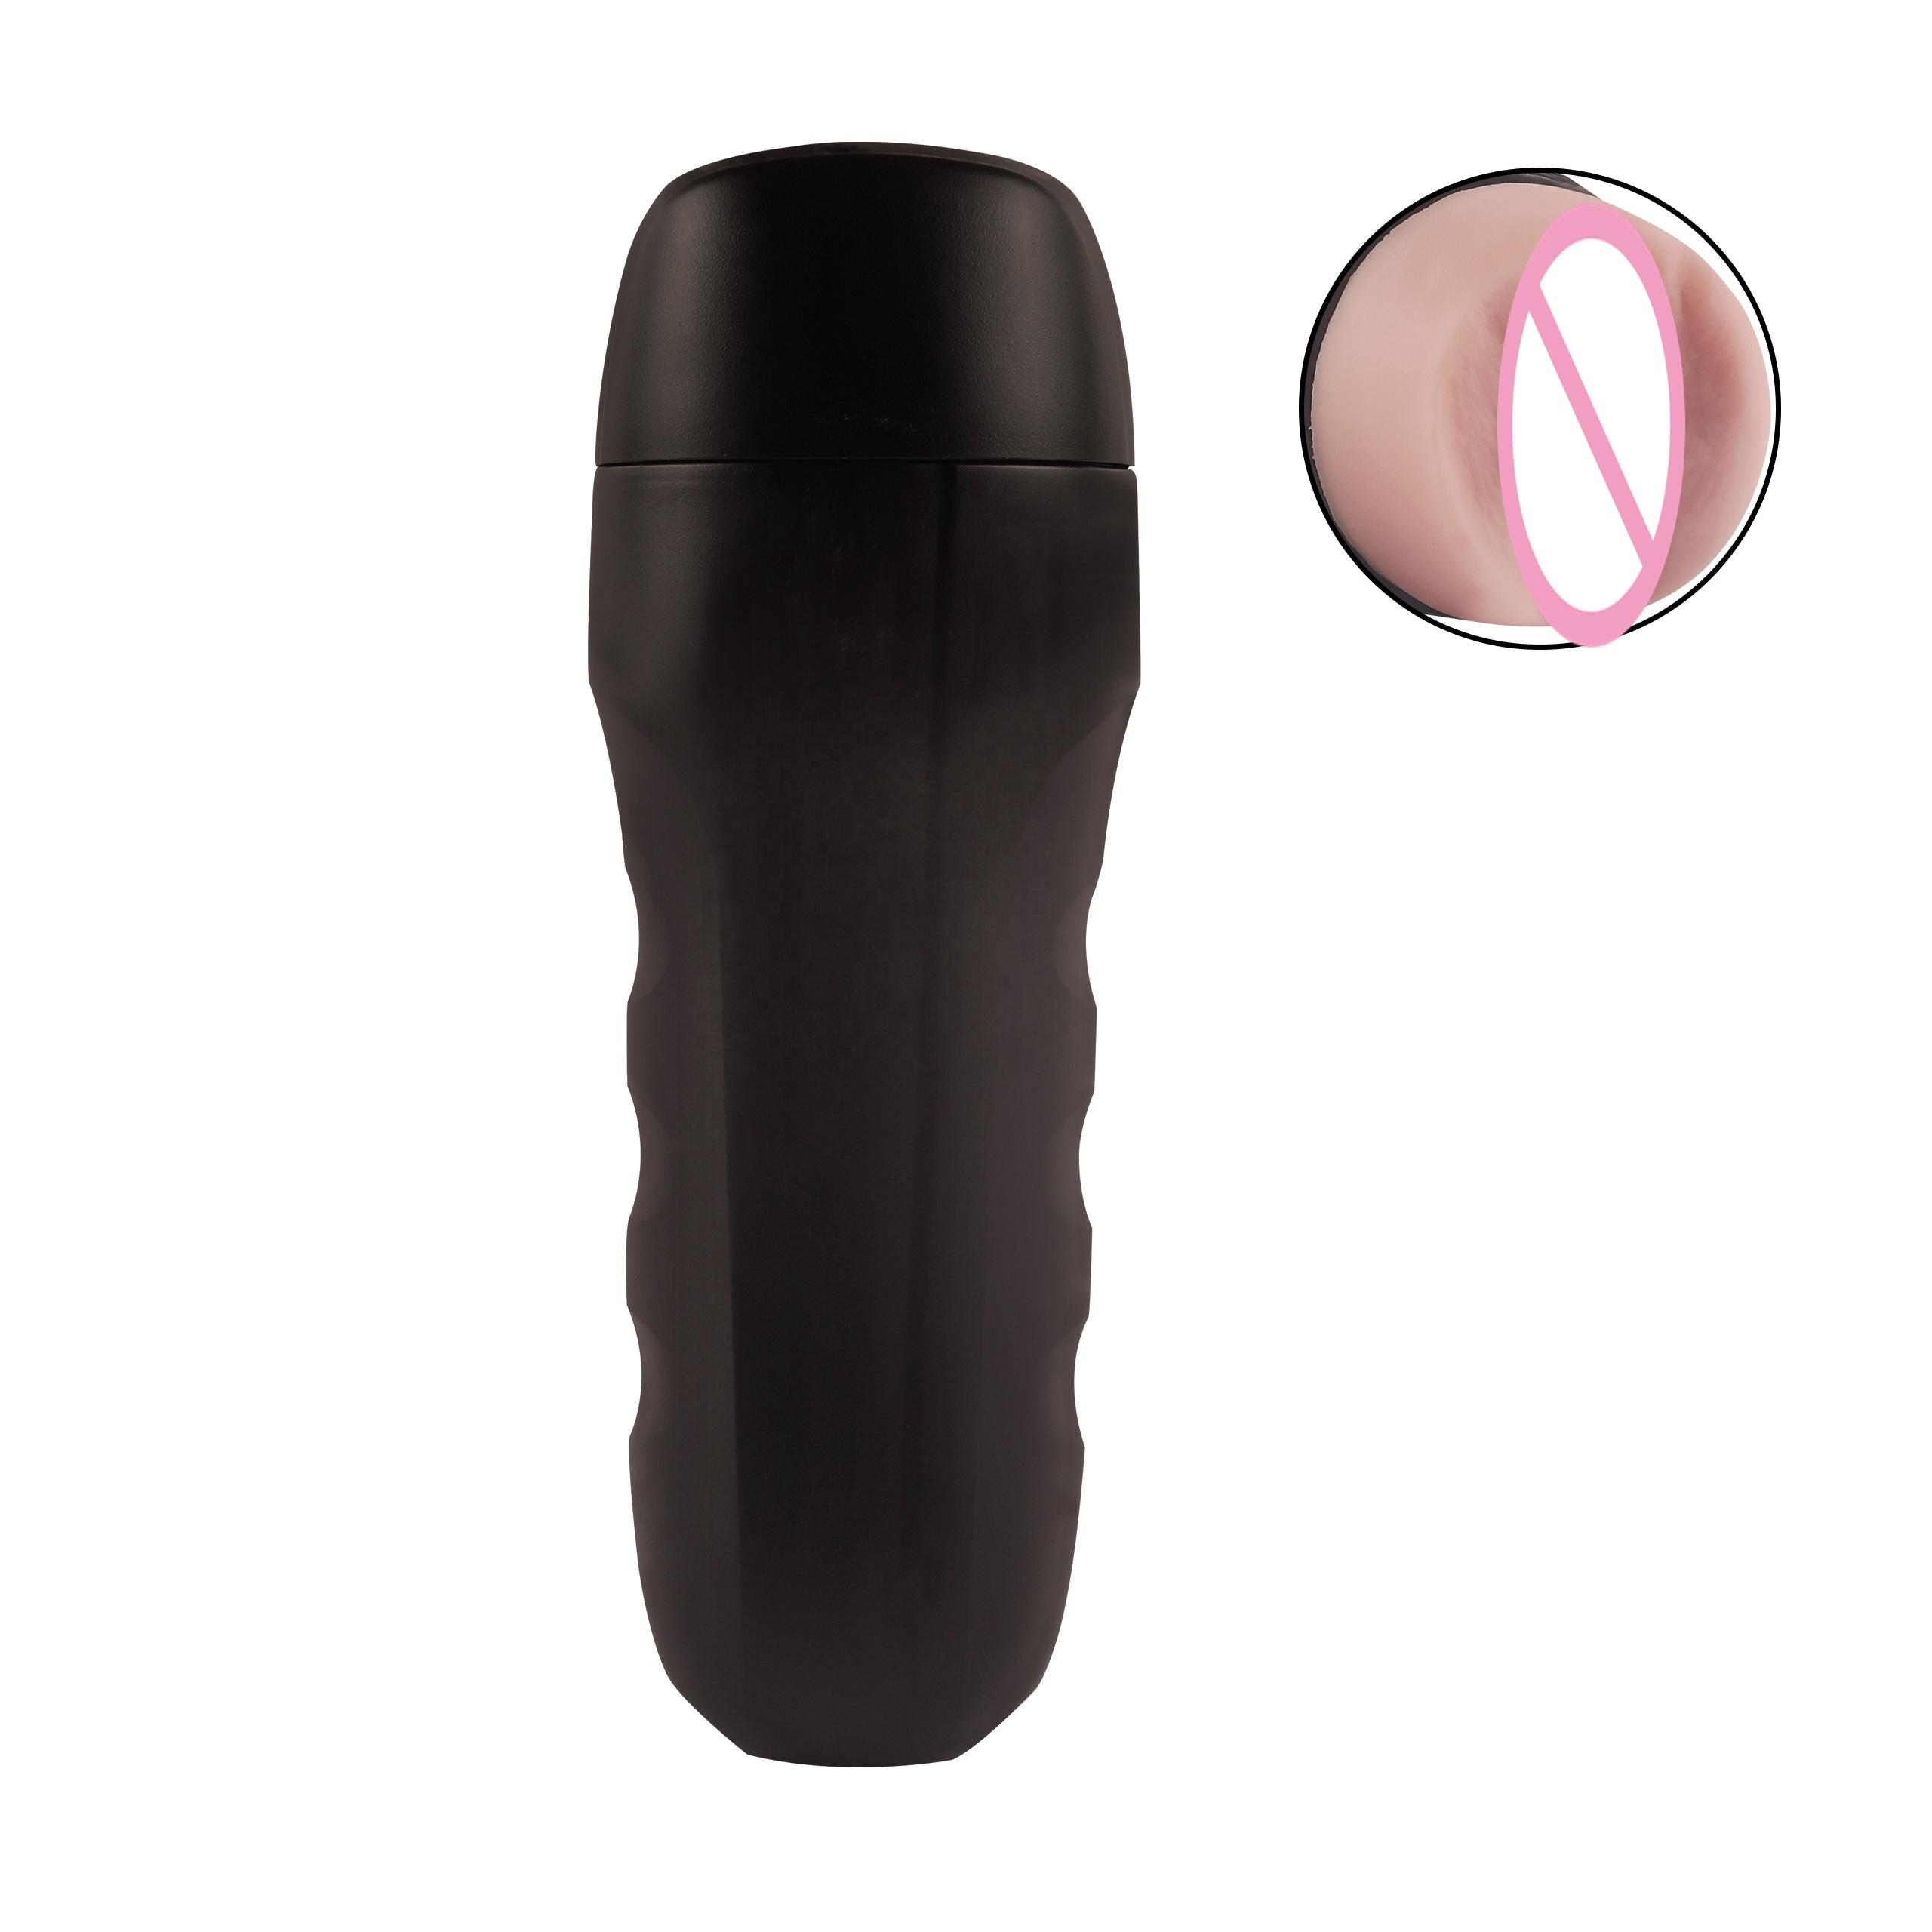  Lifelike Simulated Sensuality Male Masturbator Cup For Men Woman&#39;s Realistic Pussy Vaginal Sex